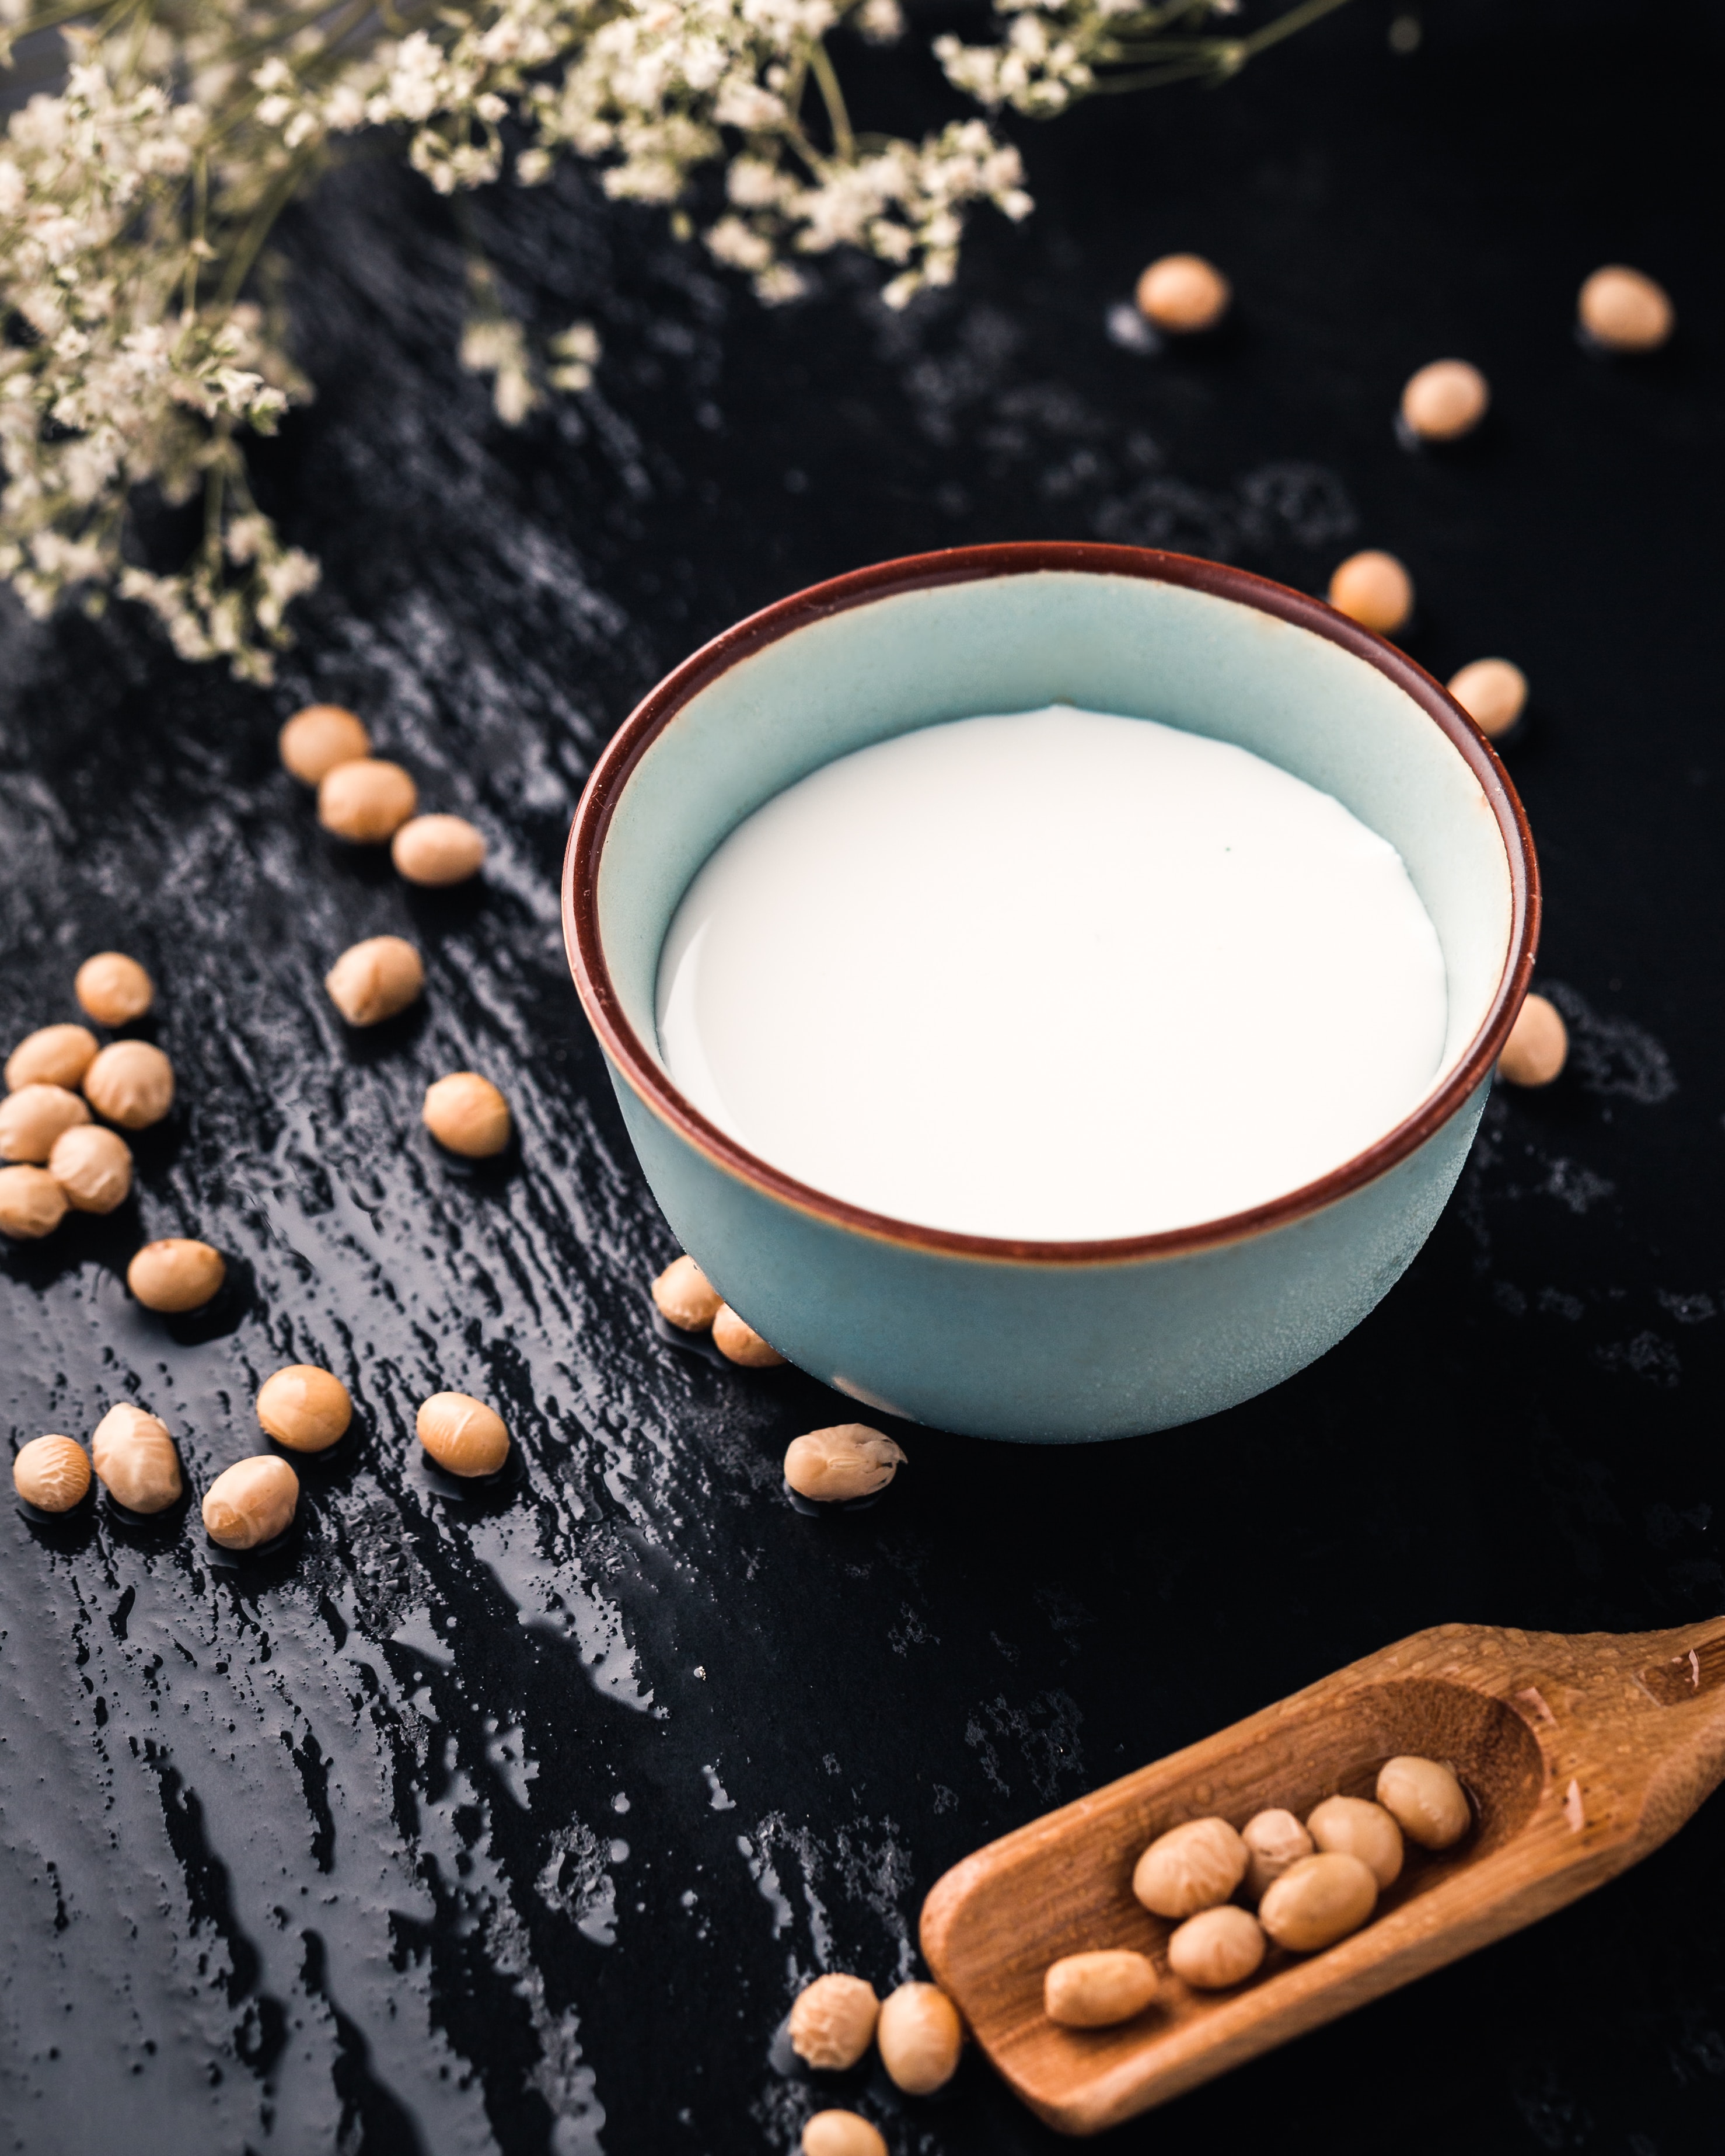 How Soy Intake Affects Fertility